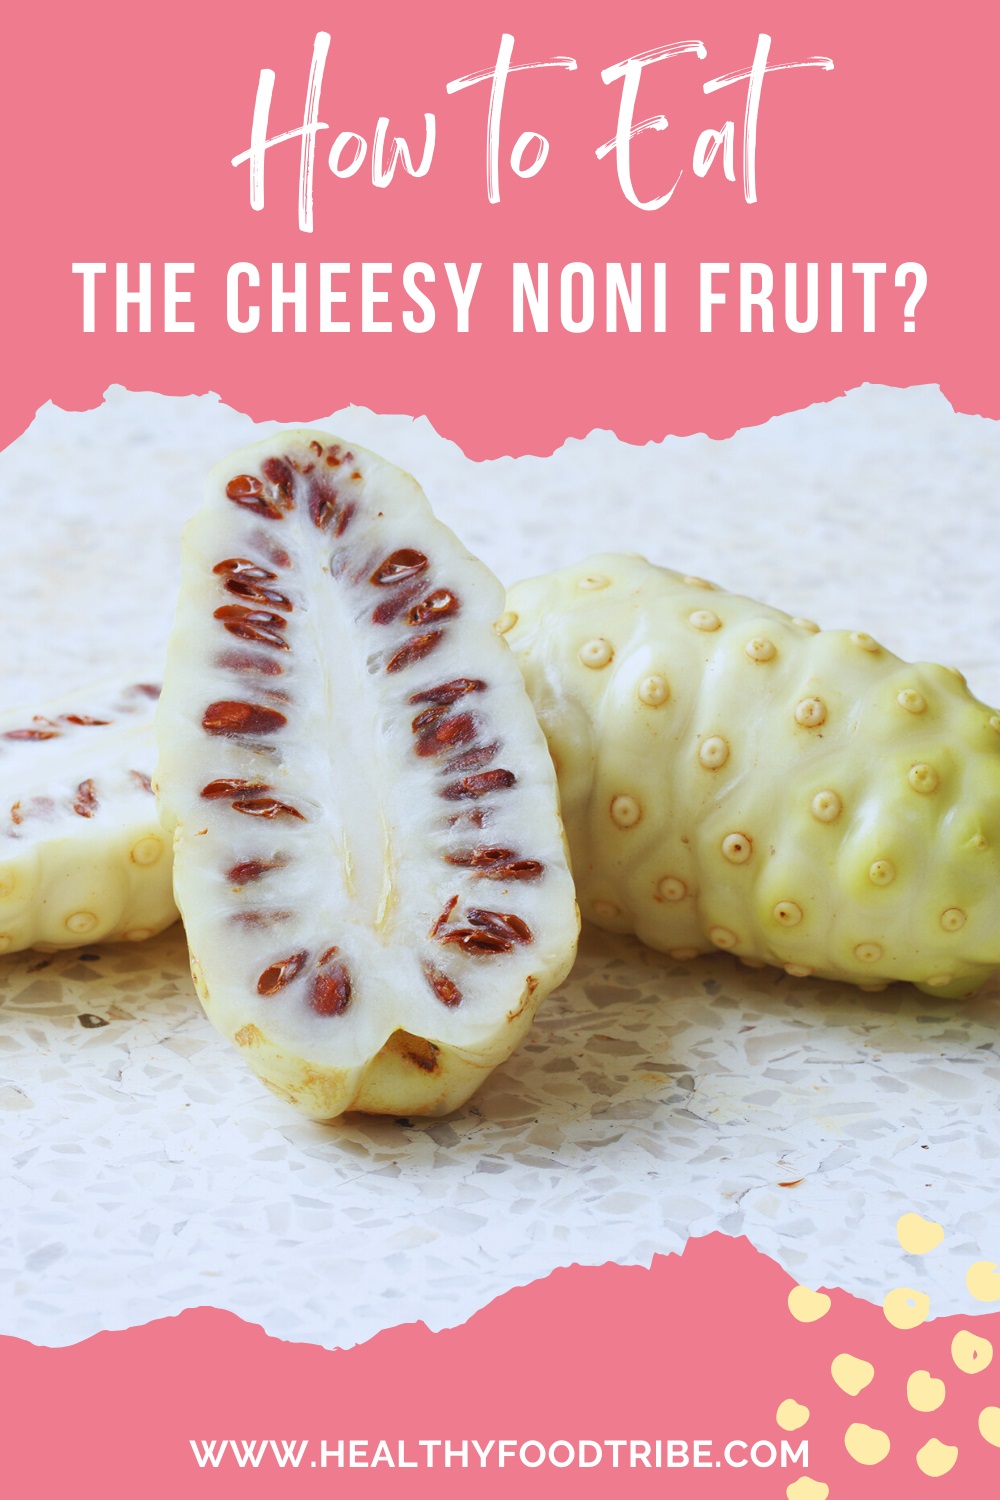 How to eat the cheesy noni fruit